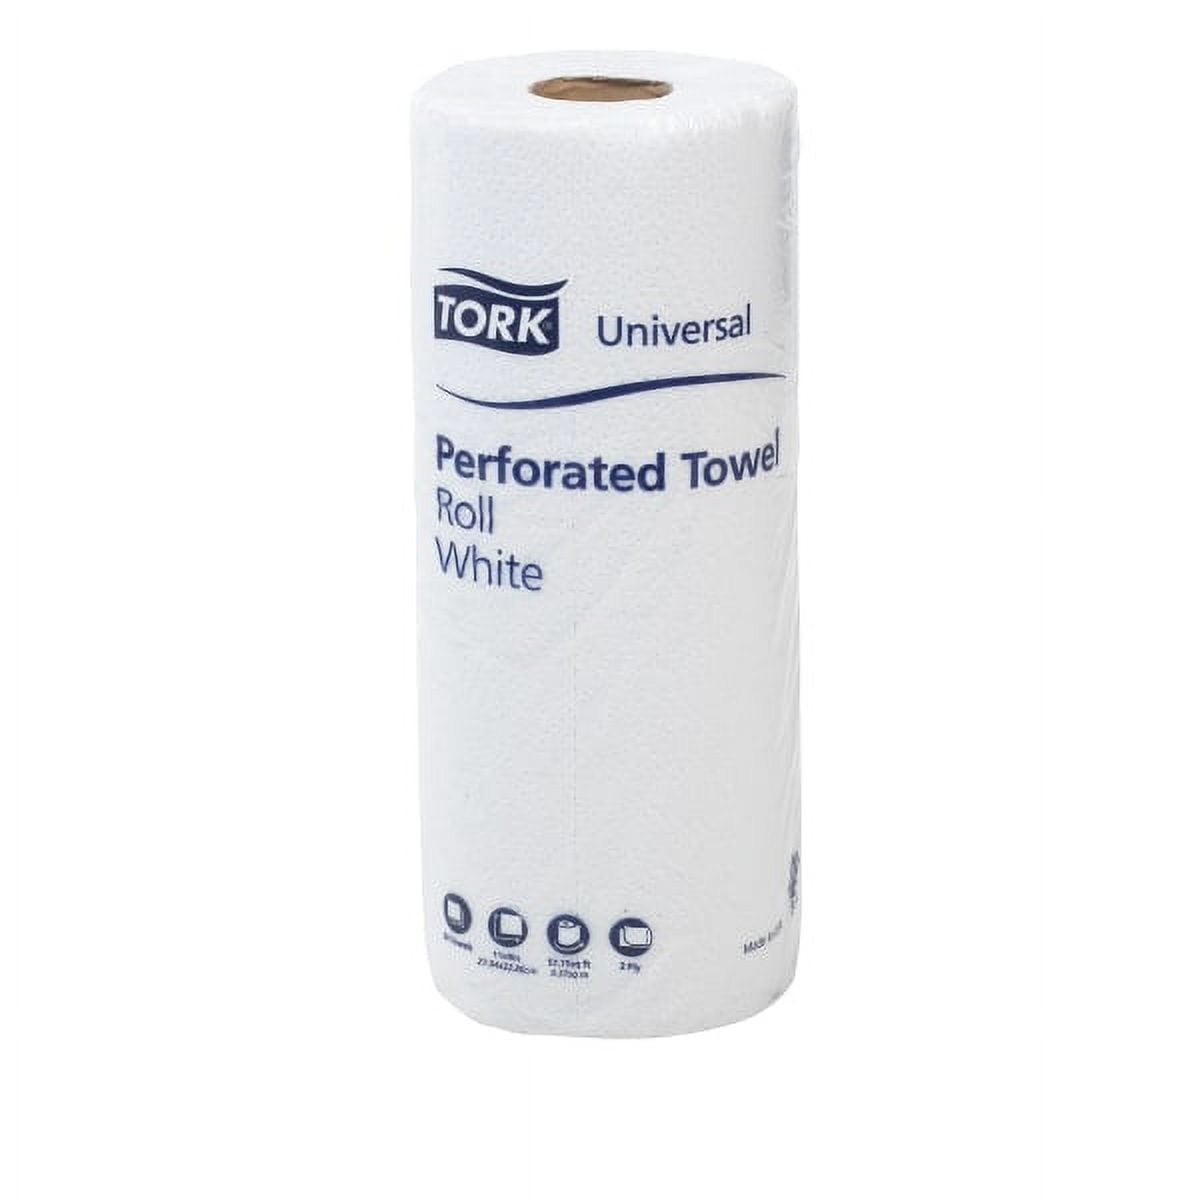 Hb1990a Pec 2 Ply 84 Count Tork Perforated Roll Towel, White